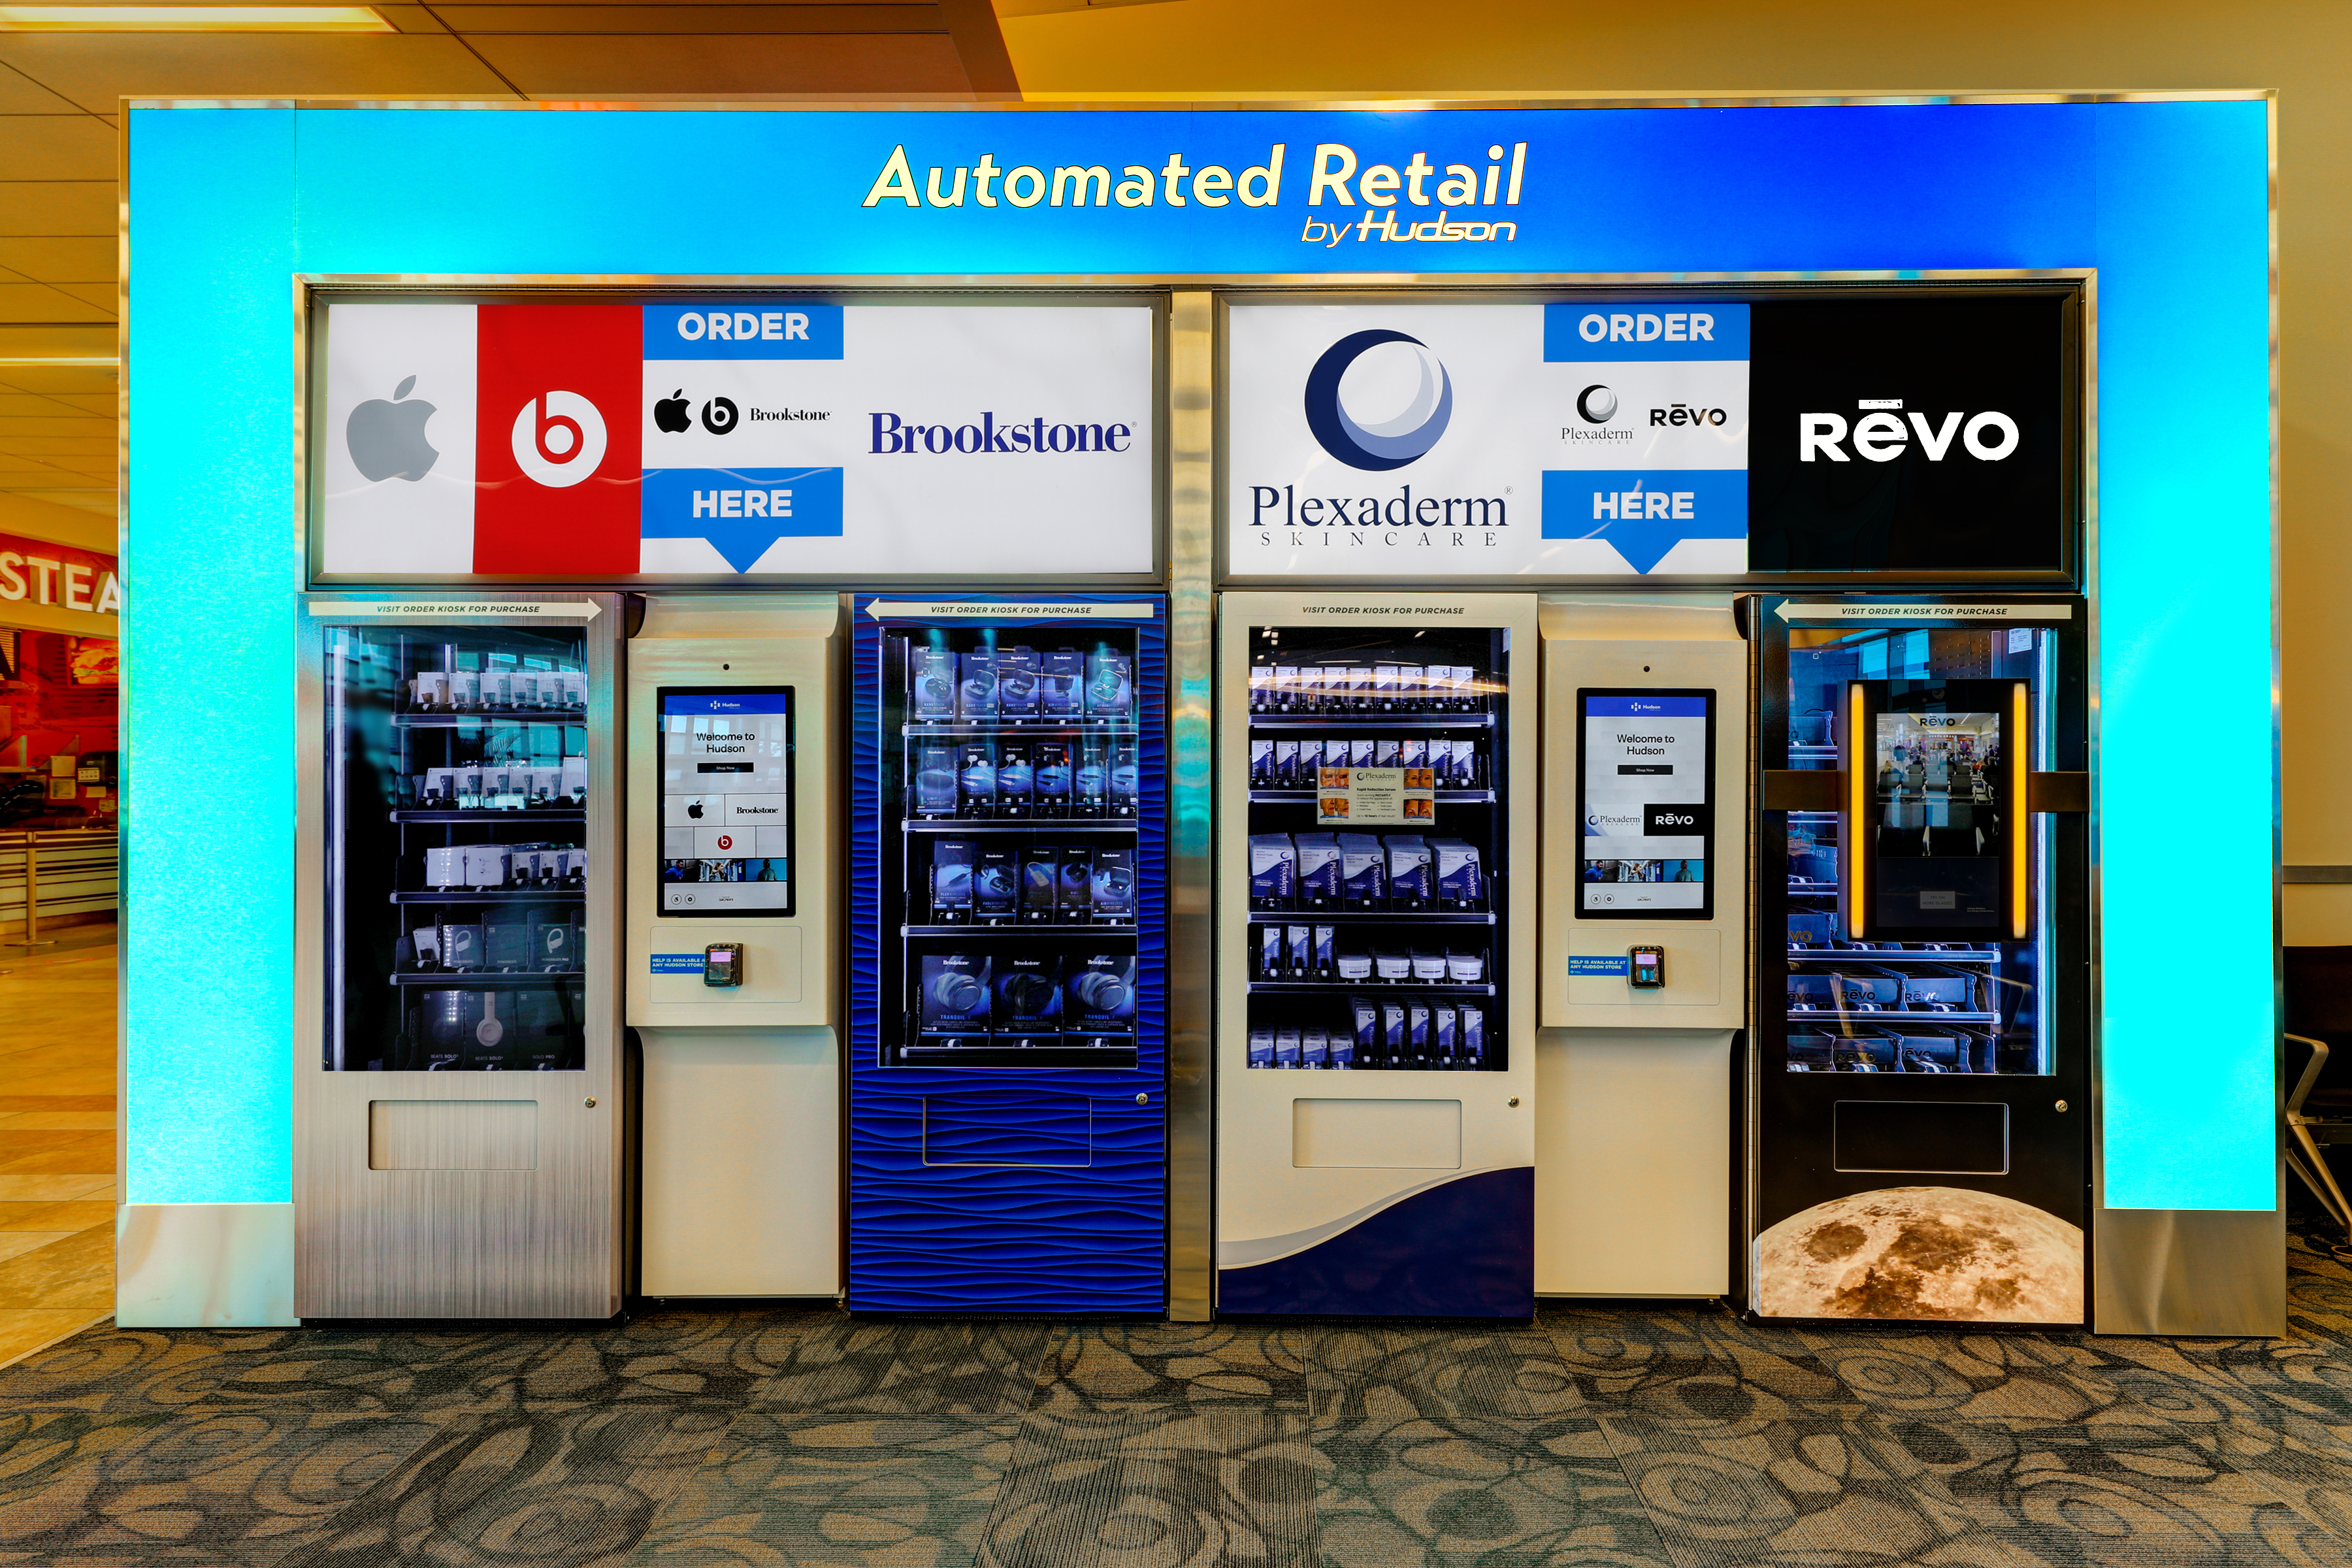 Hudson Ushers in Future of Automated Retail, Launching New Vending Destinations Across North American Airports